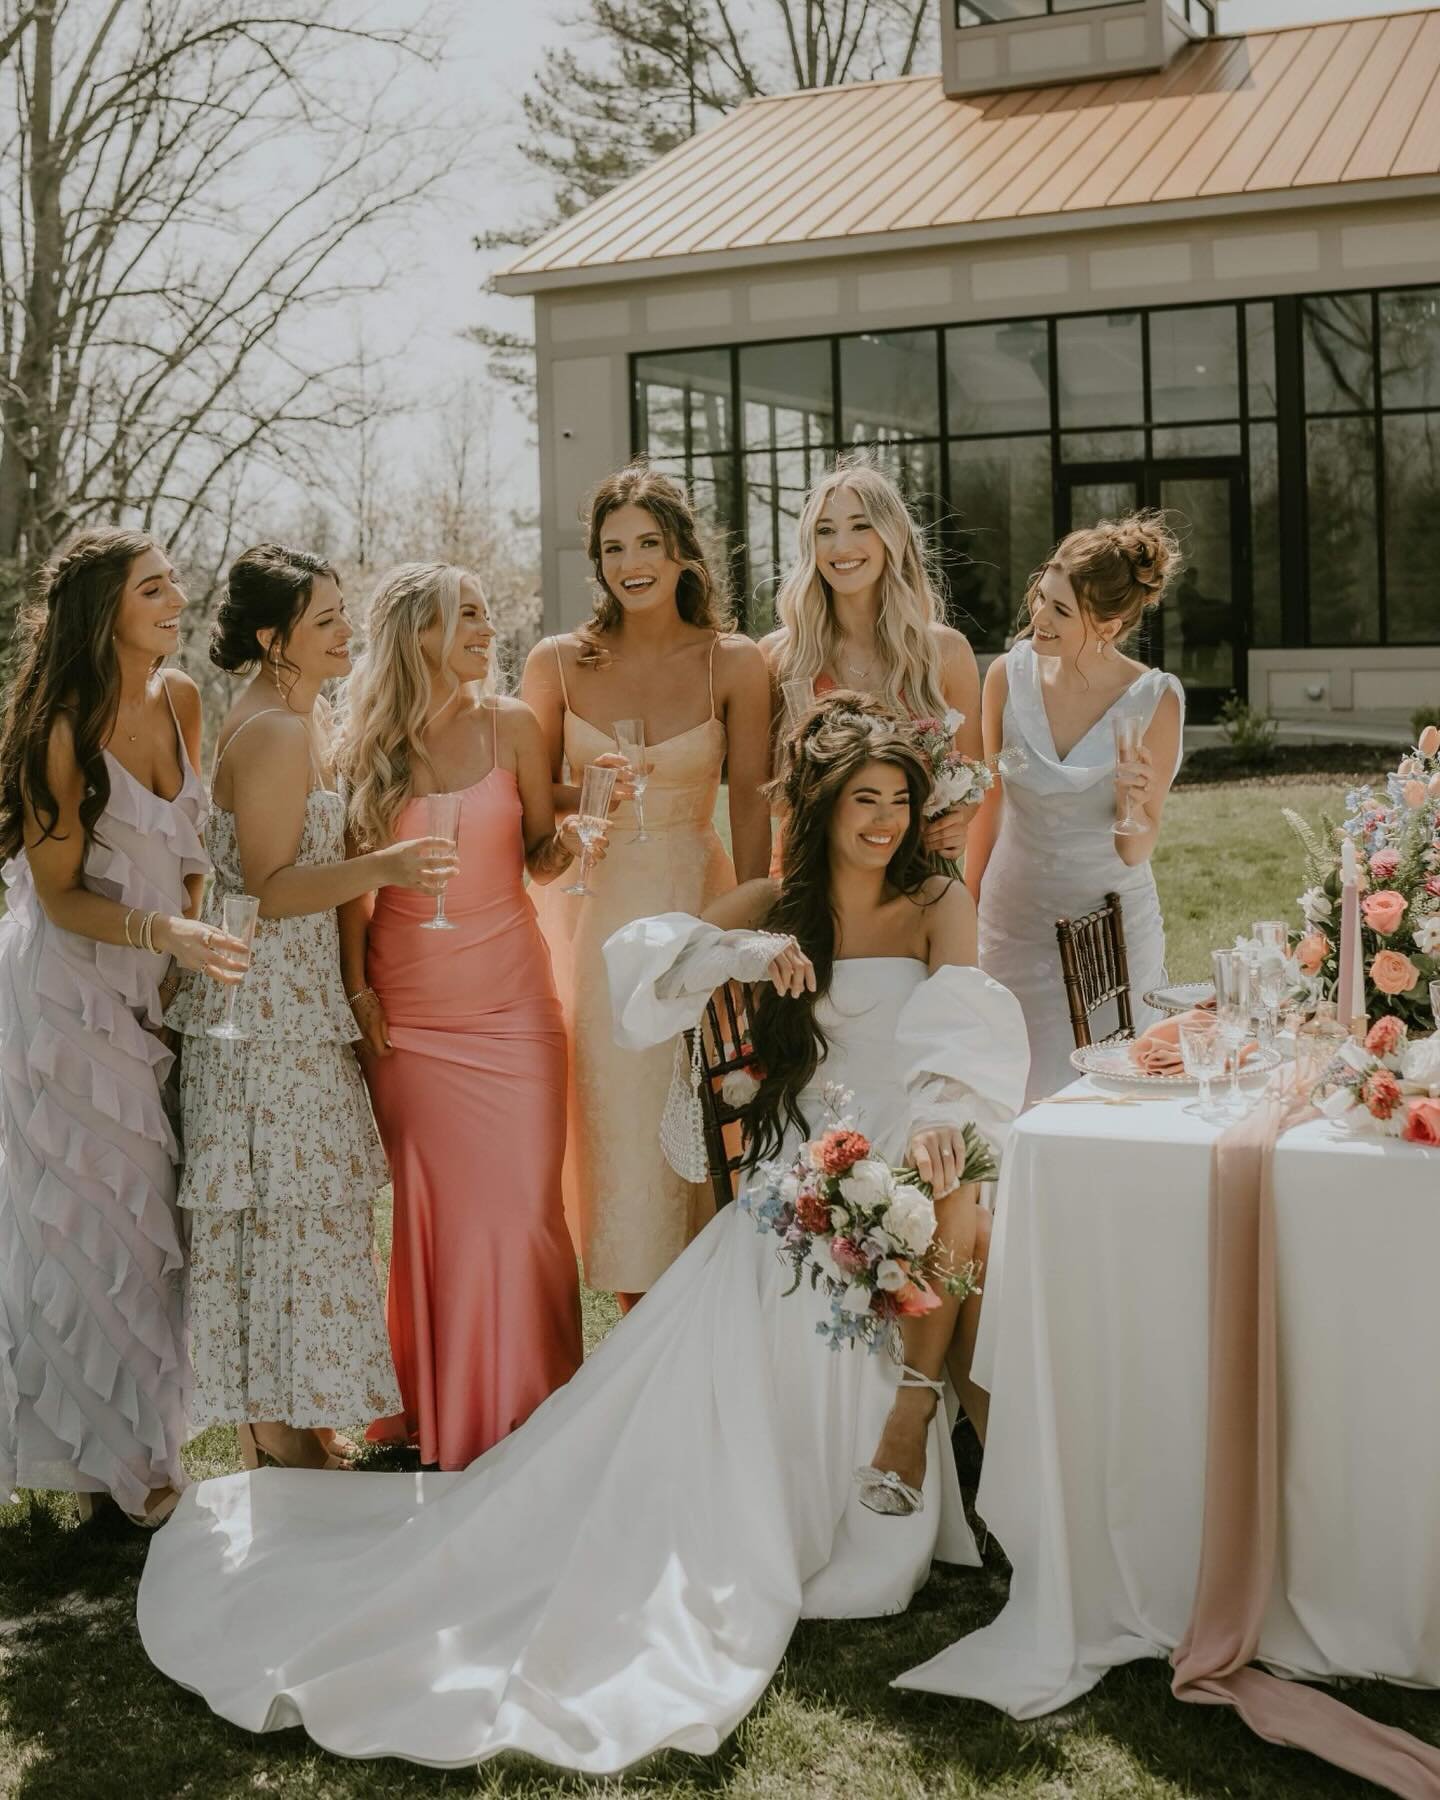 🌸🌸🌸I am really loving all of these pops of color with bridesmaids dresses, cakes, florals, I could go on and on. 🌻🌺🪻It&rsquo;s been so much fun to get creative lately. Not to mention the trees starting to come back to life. It&rsquo;s really st